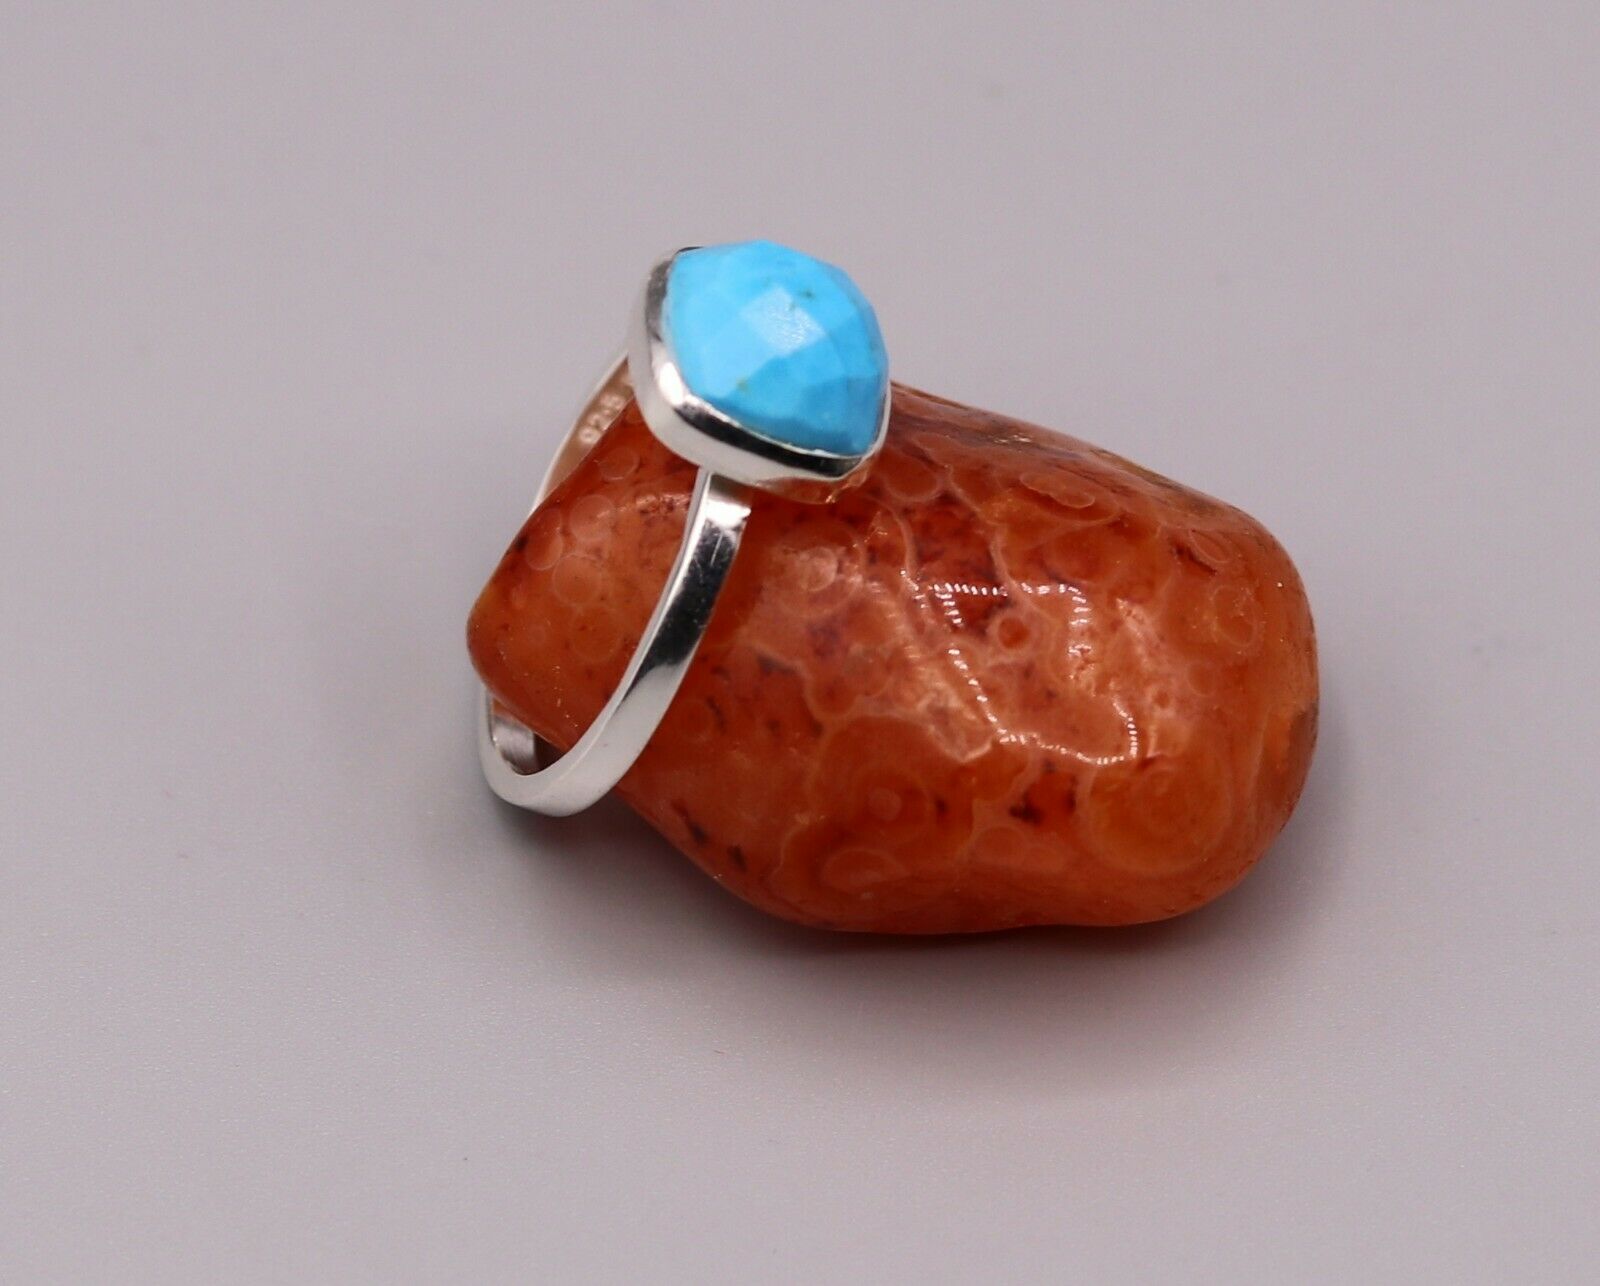 BLUE TURQUOISE STONE 925 SOLID SILVER UNISEX RING BAND GORGEOUS JEWELRY sr90 - TRIBAL ORNAMENTS